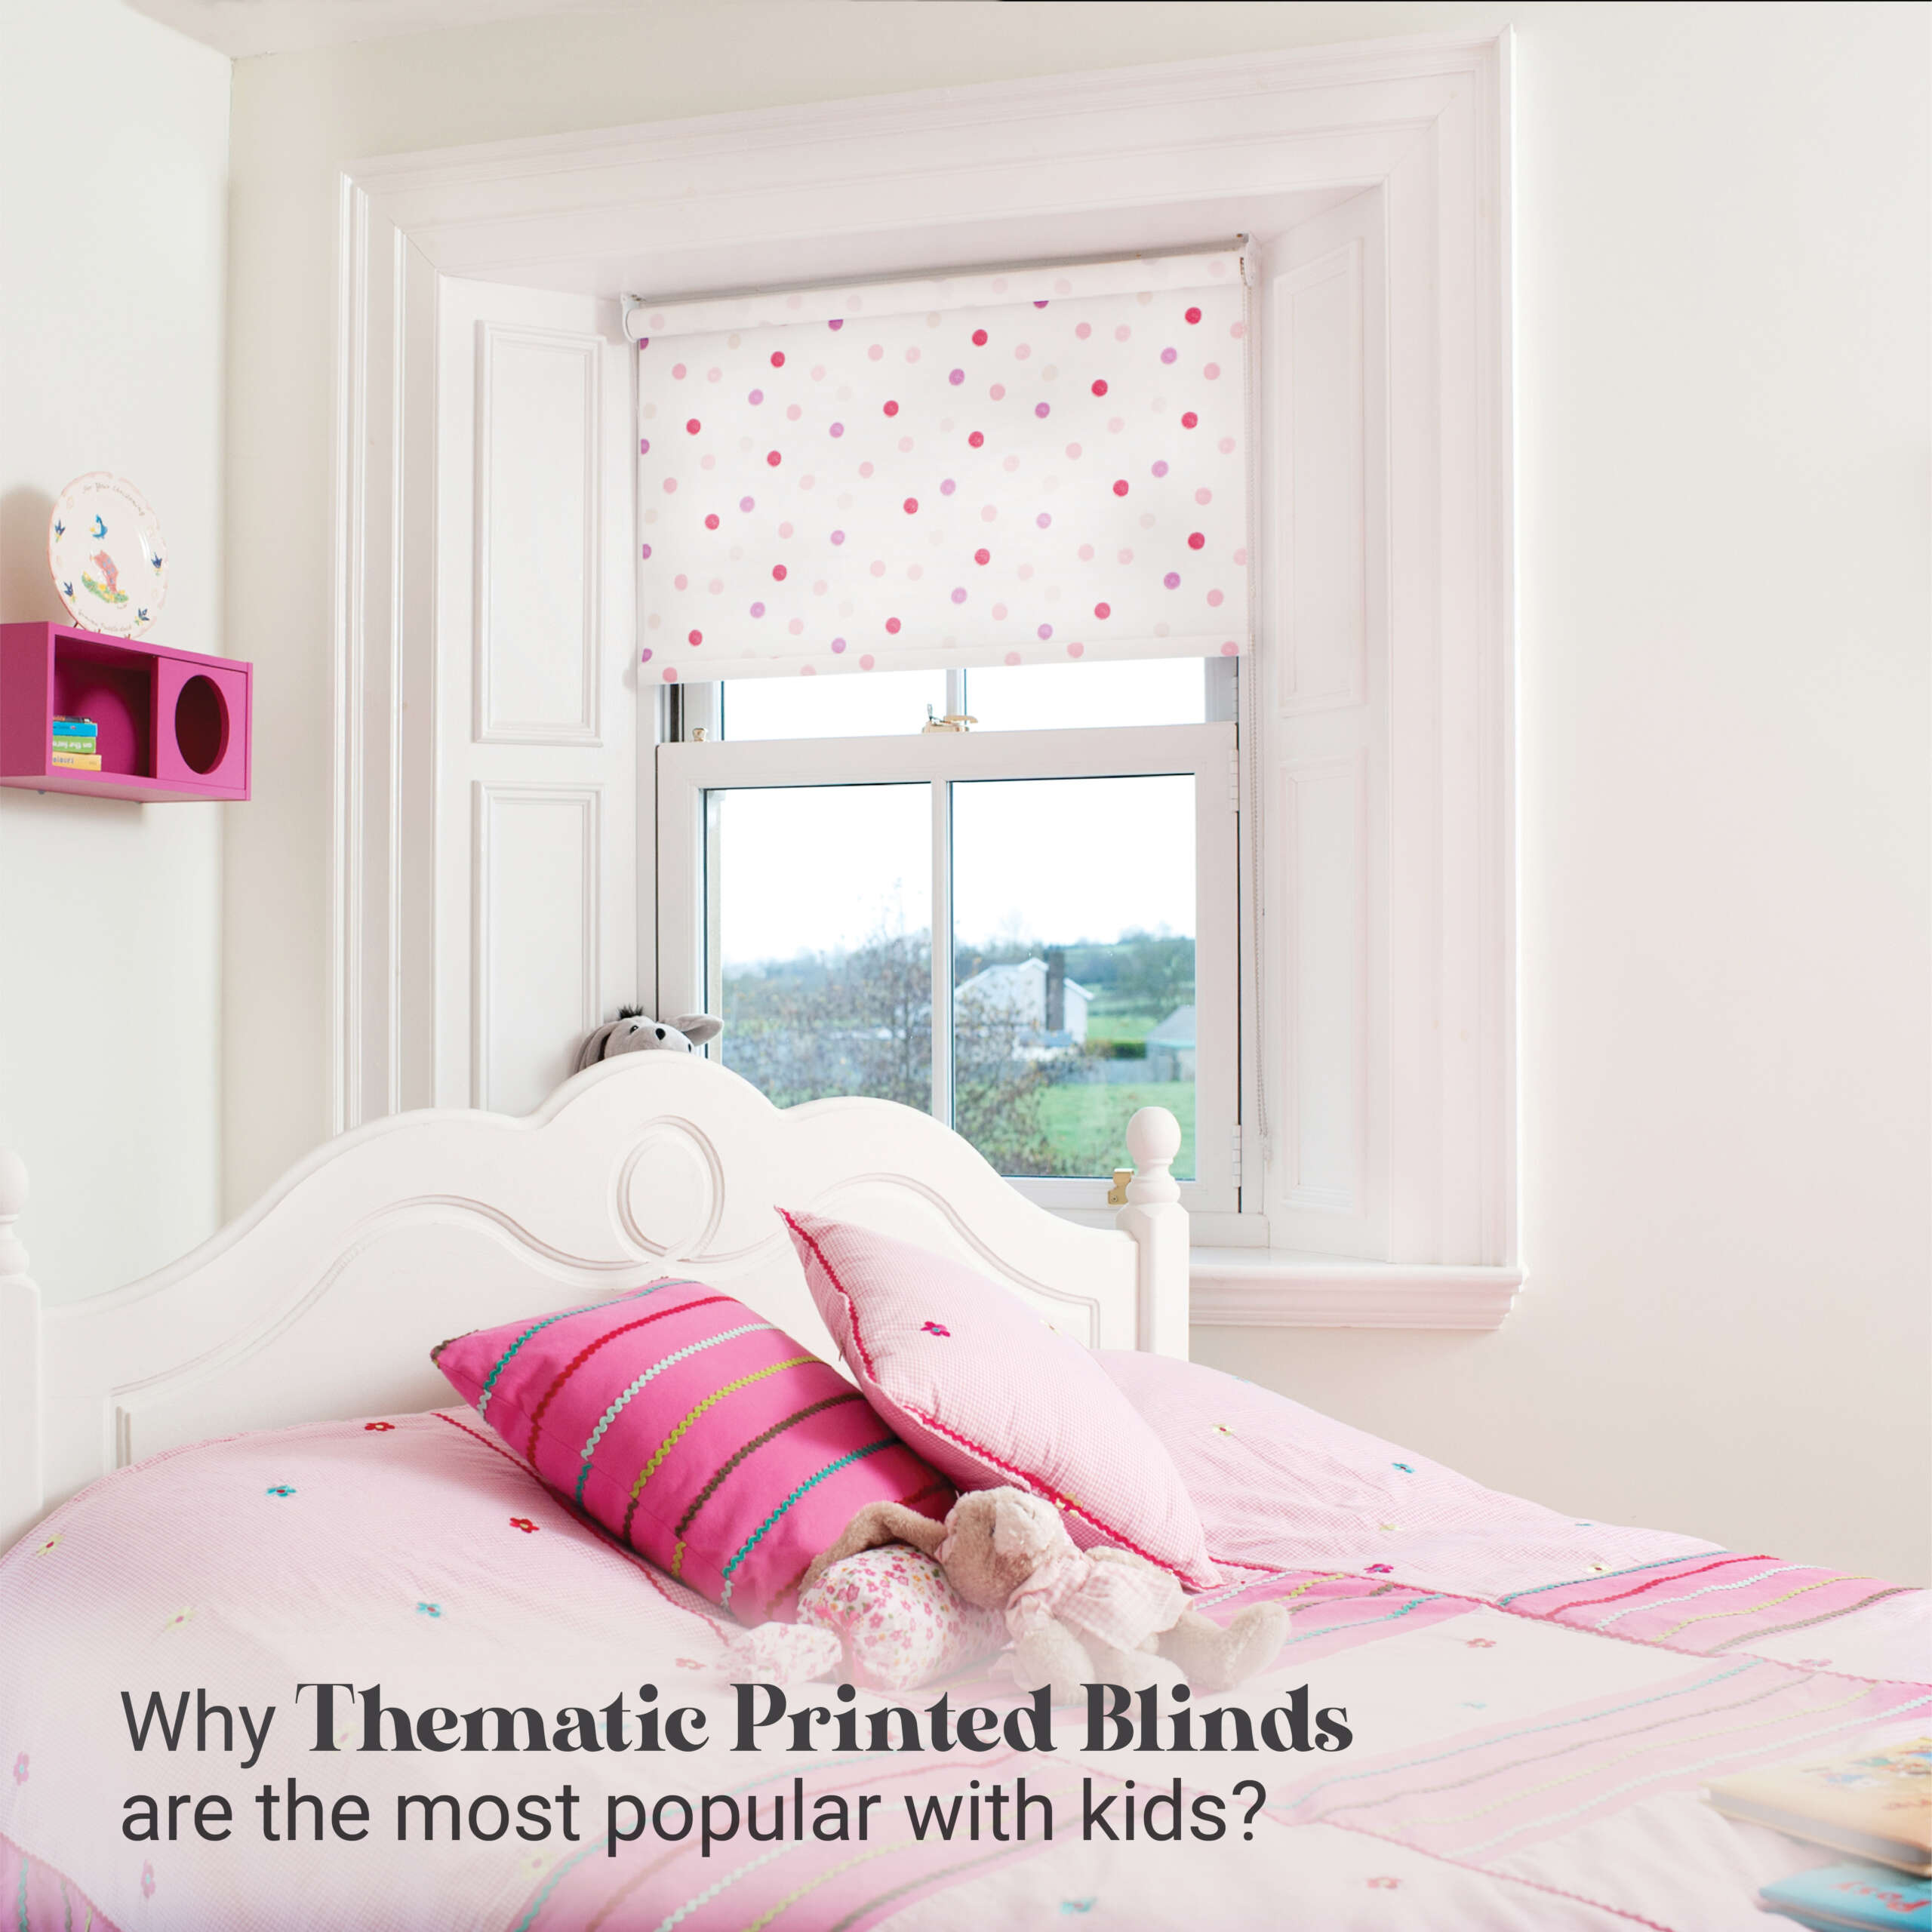 Why Thematic Printed Blinds are the most popular with kids?